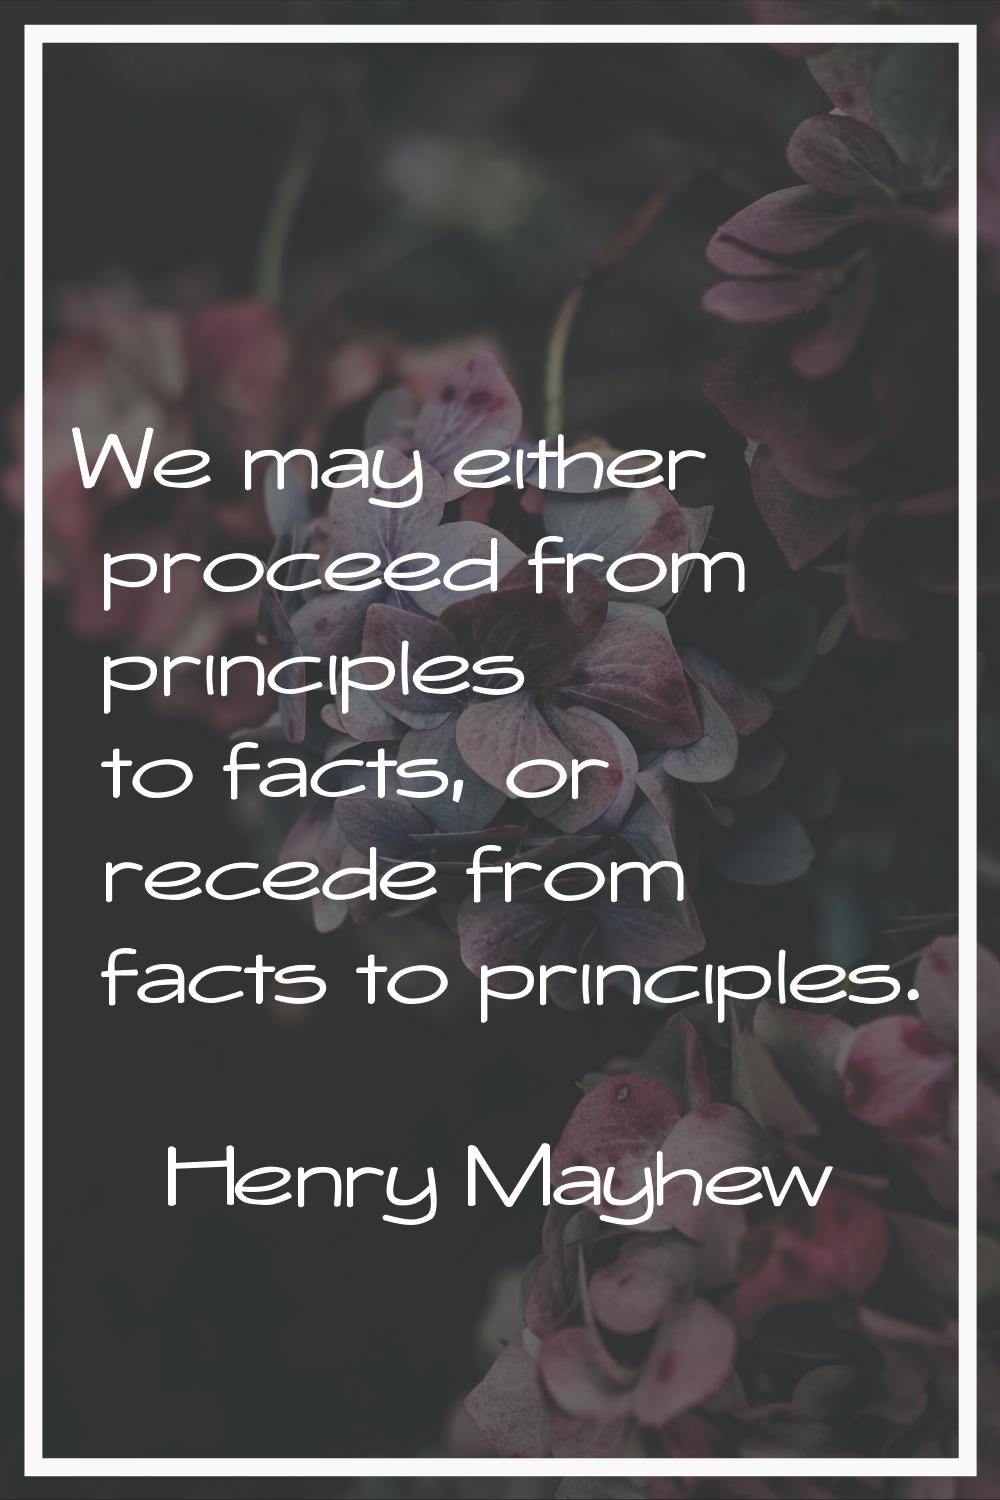 We may either proceed from principles to facts, or recede from facts to principles.